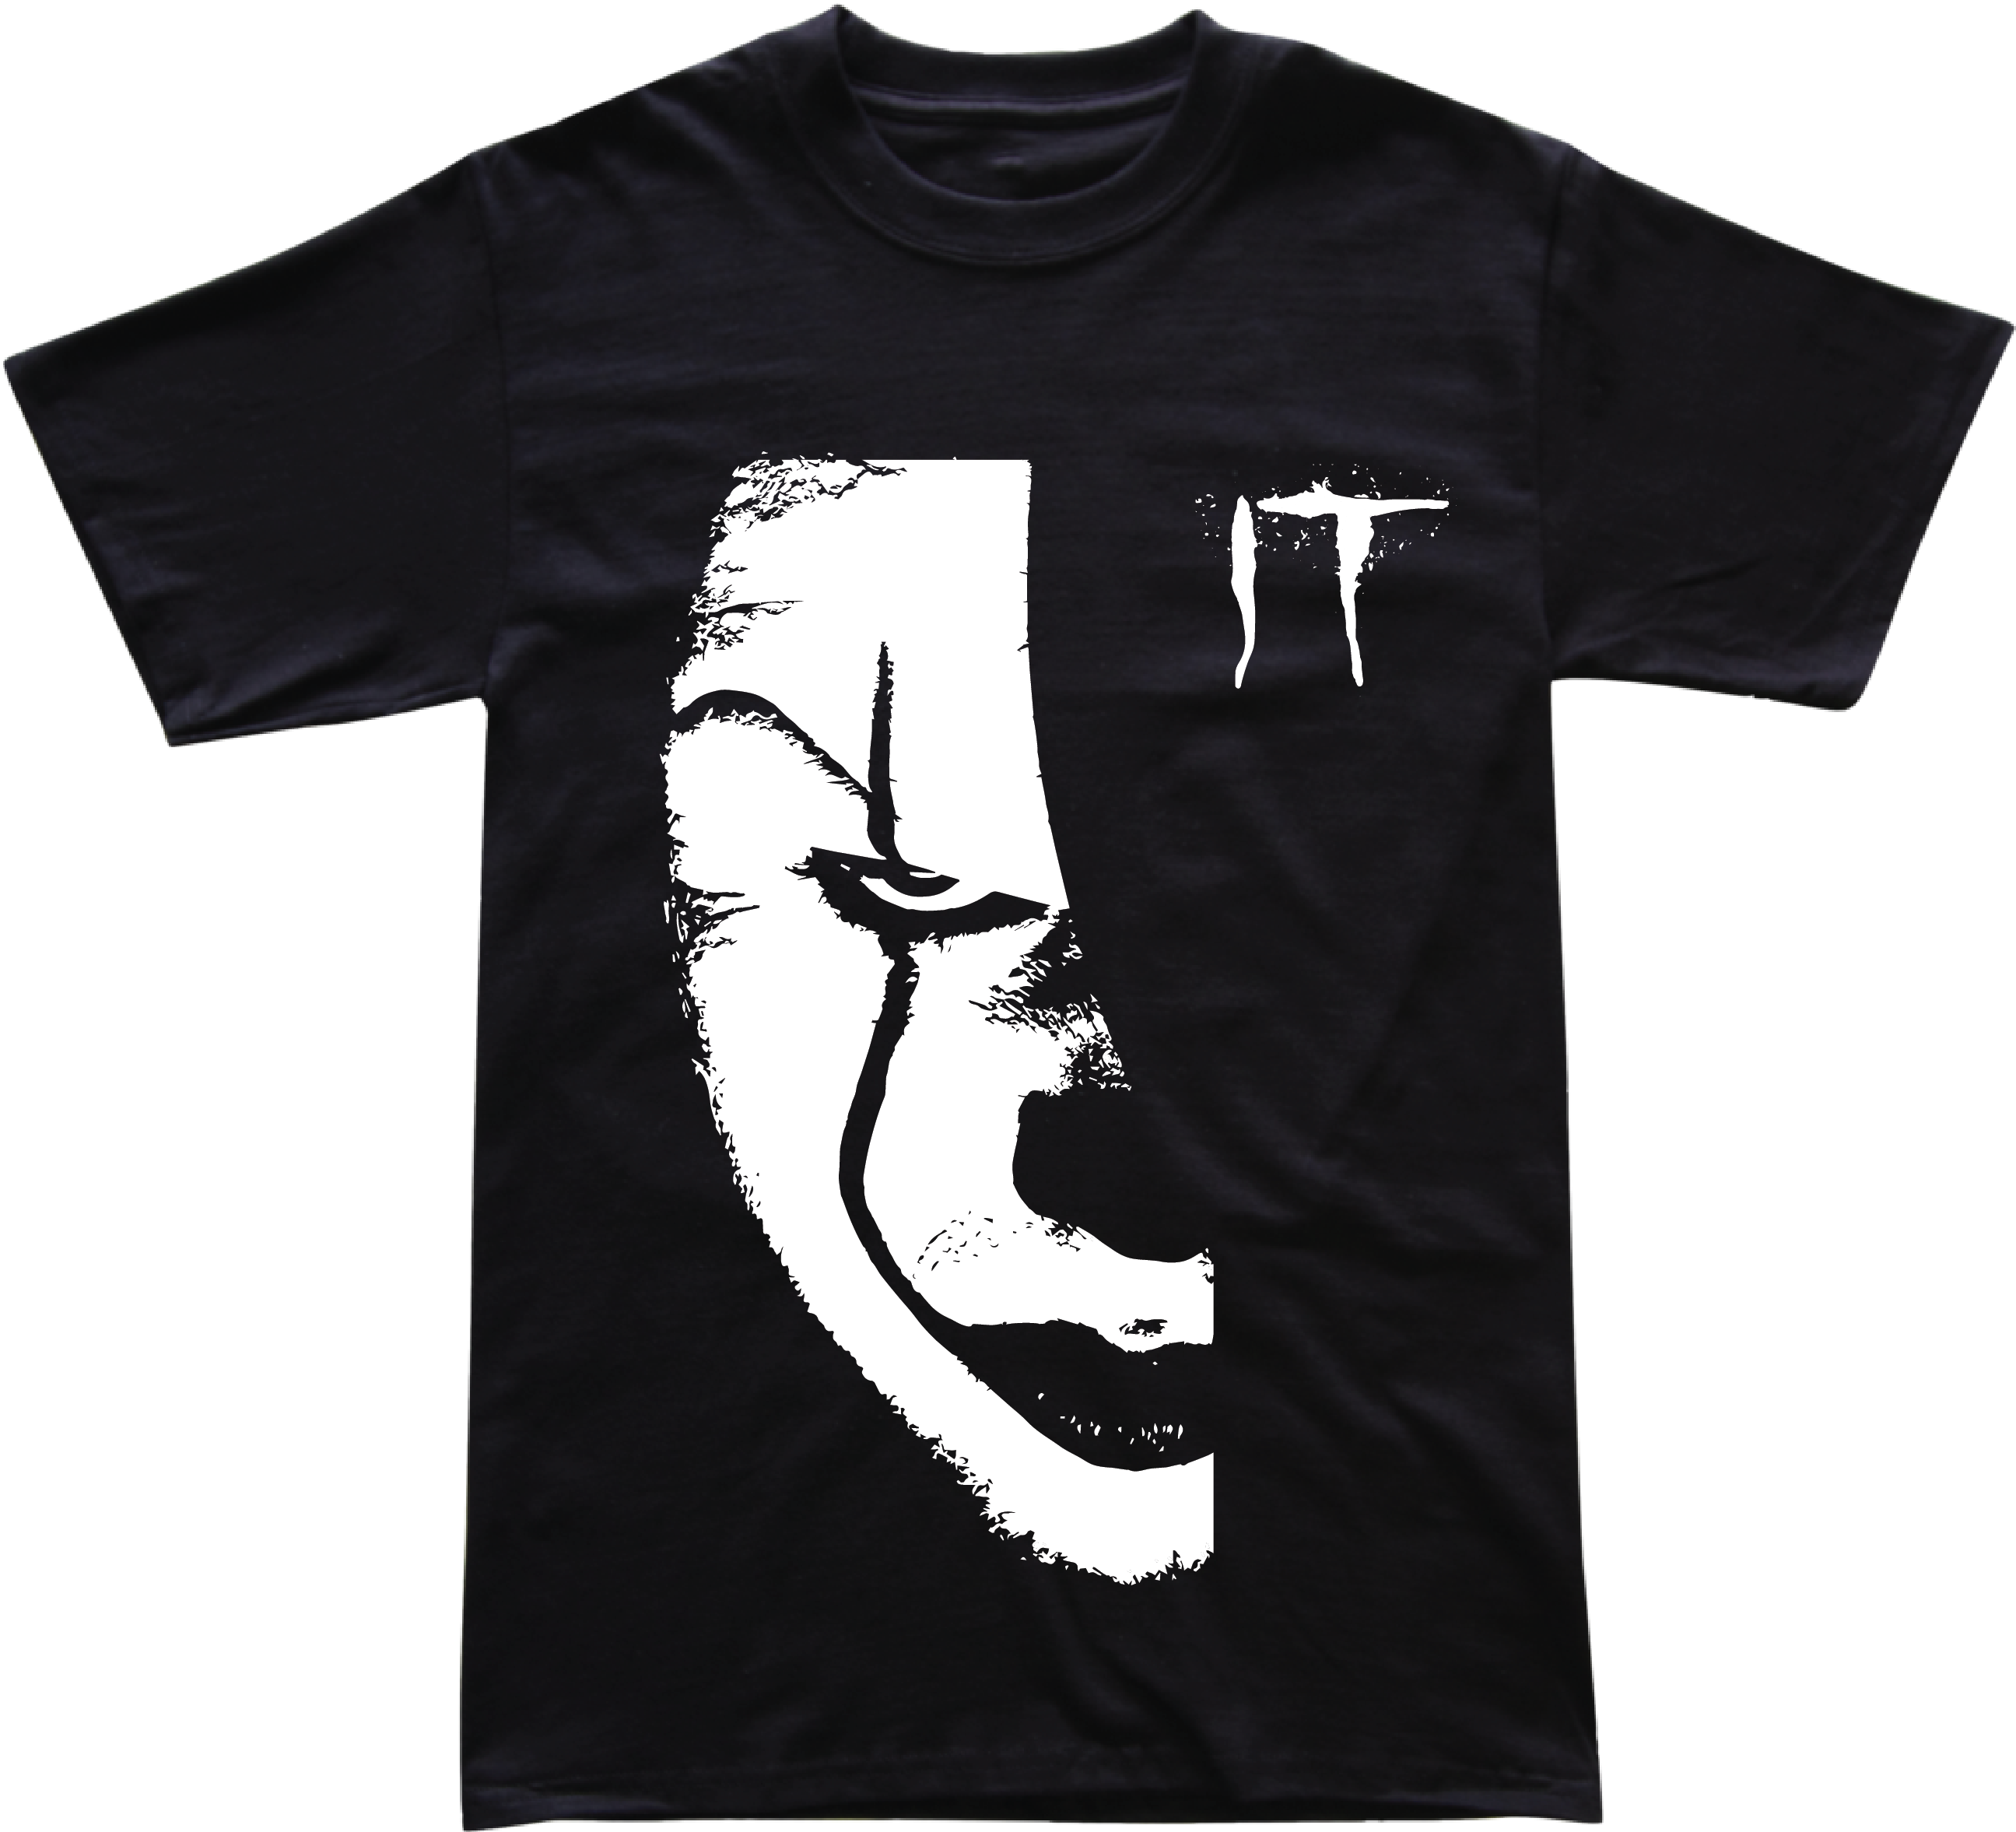 Pennywise Graphic Tee Design